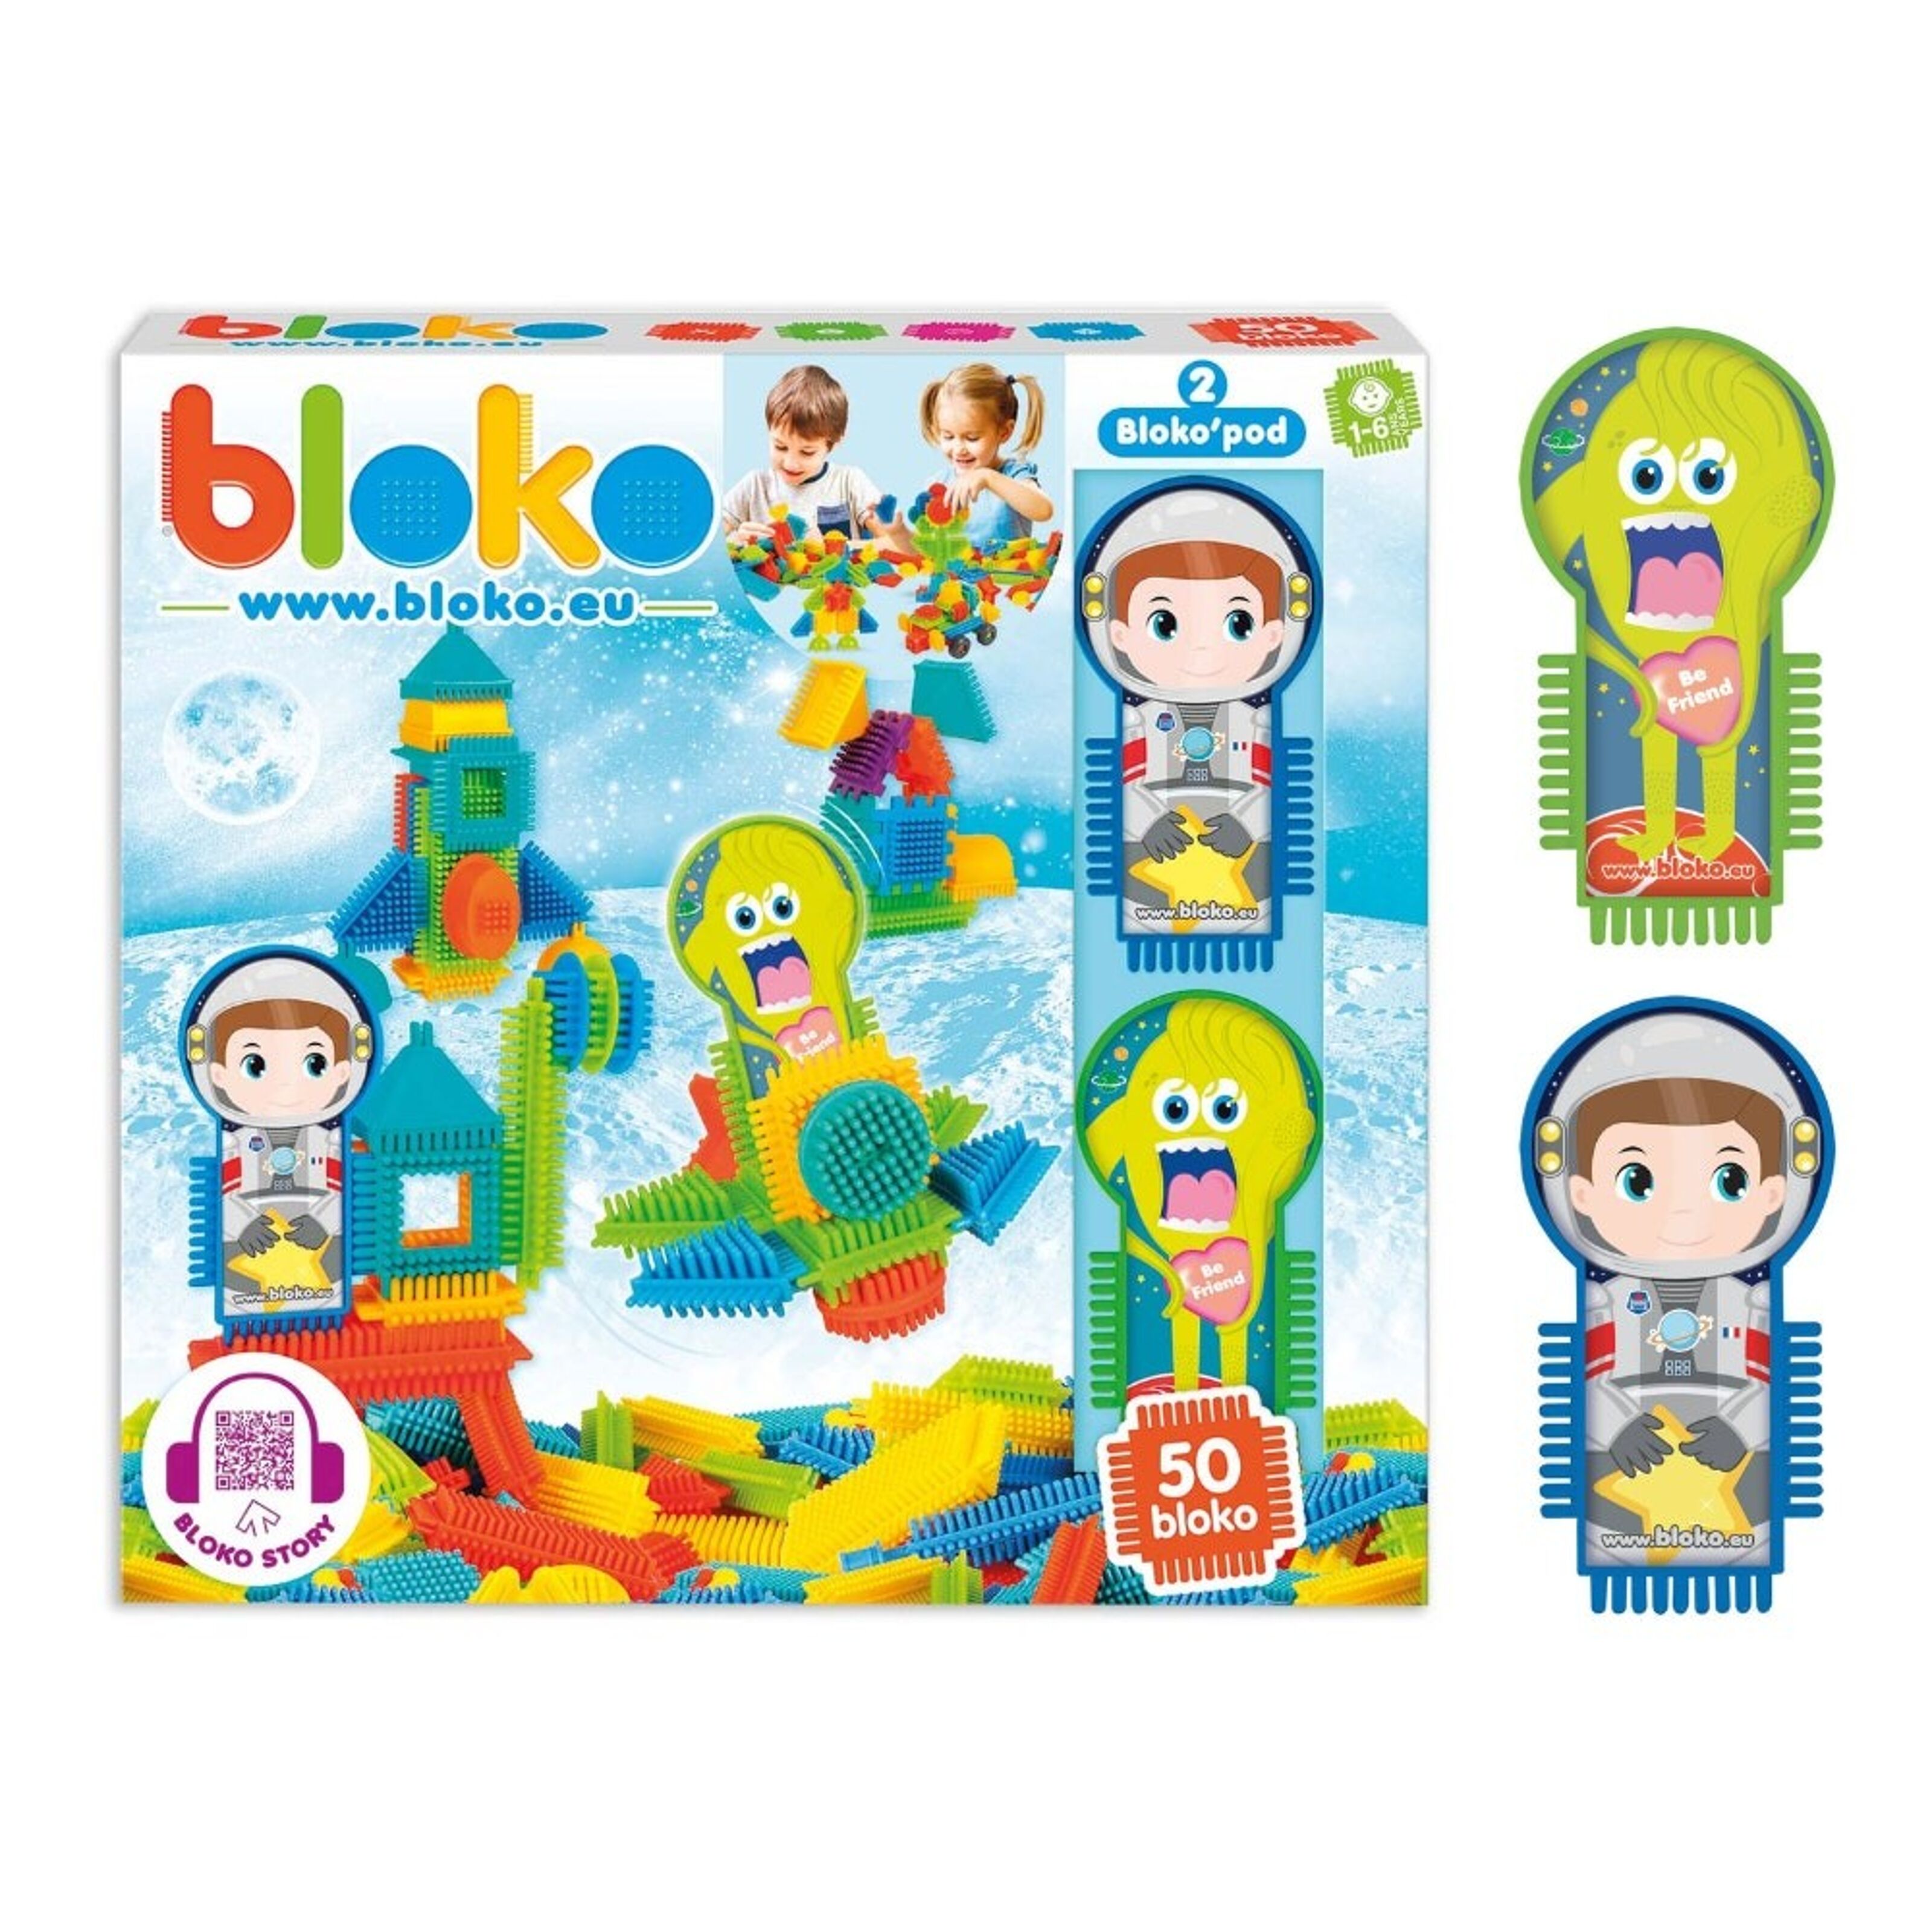 Have you heard of Bloko? Bloko is a - The learning store